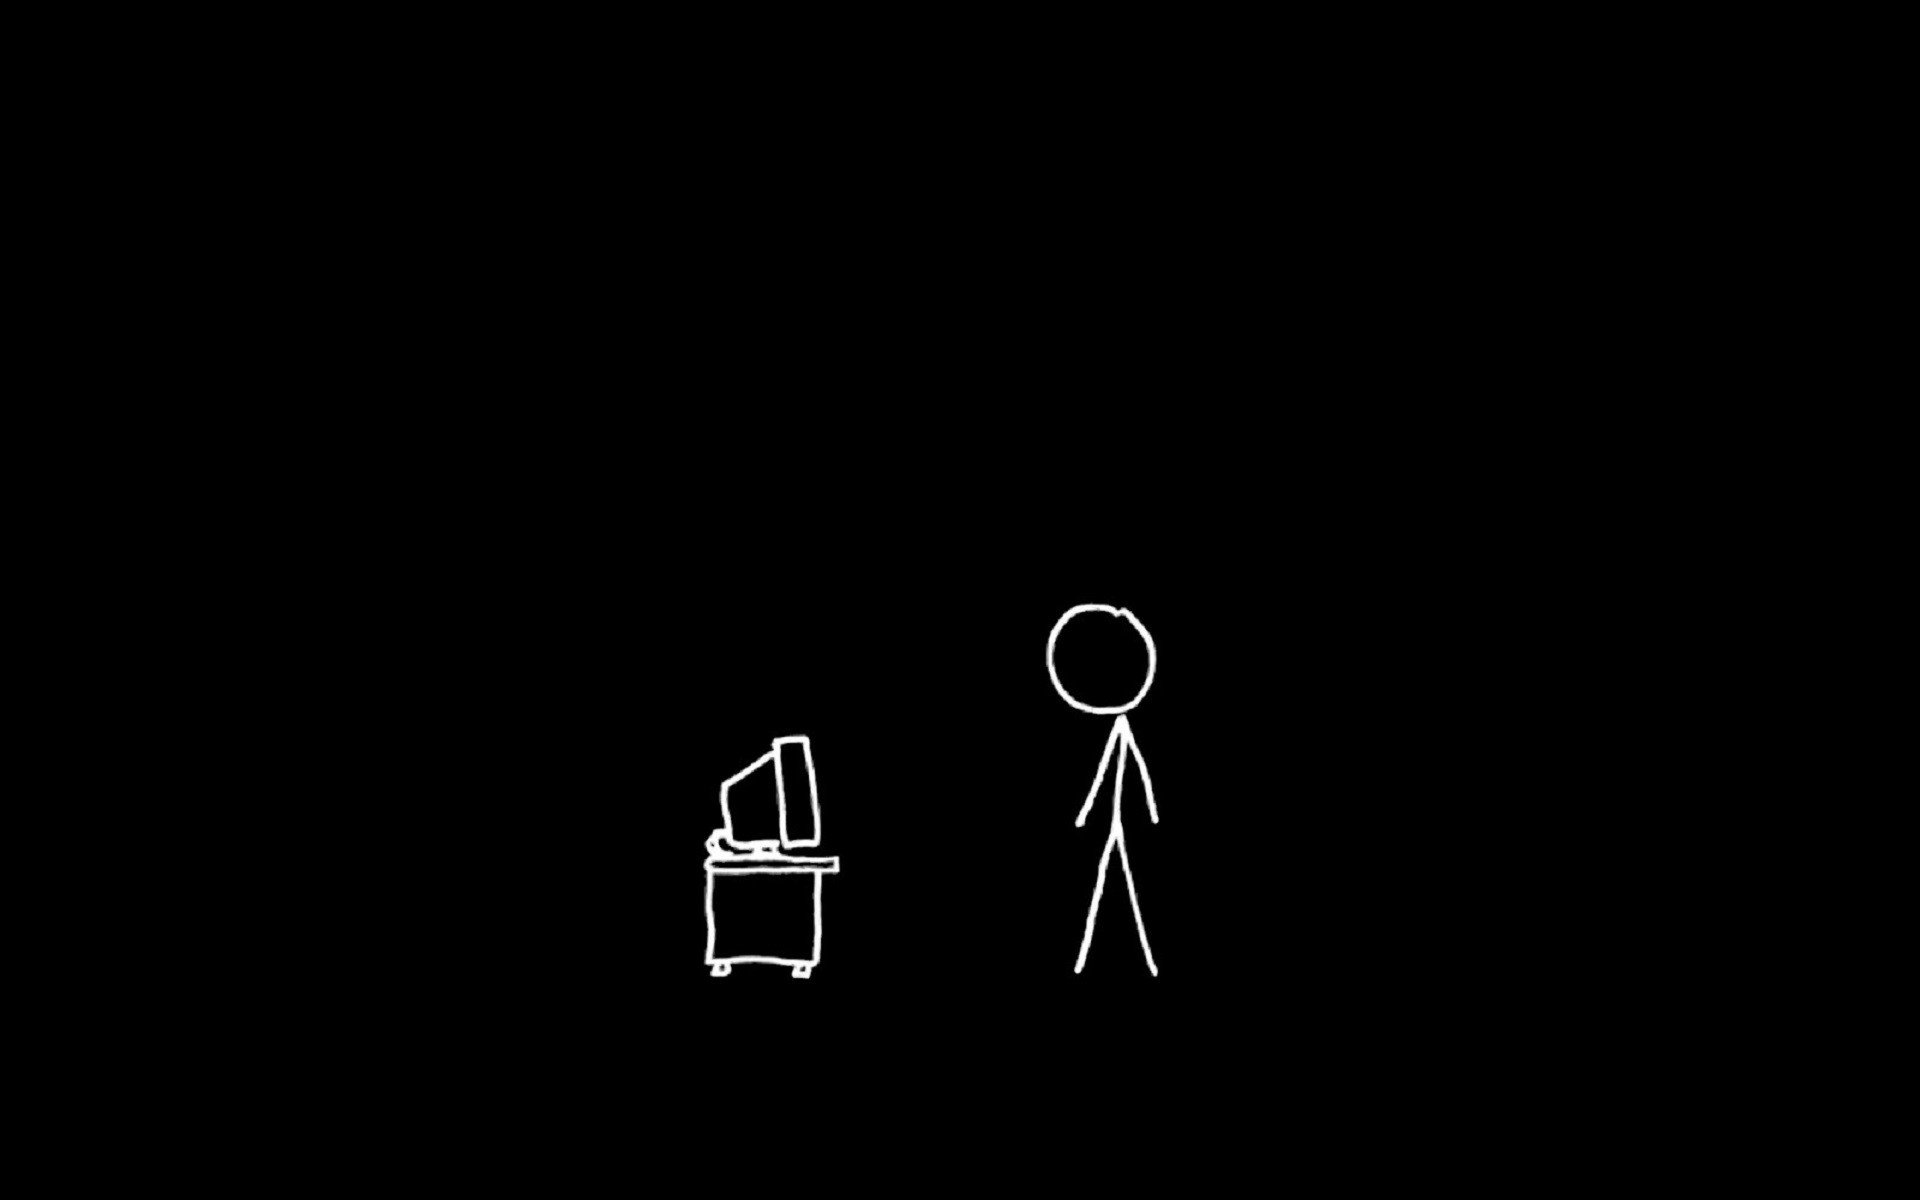 Black Background Monochrome Minimalism Xkcd Hd Wallpapers Desktop And Mobile Images Photos